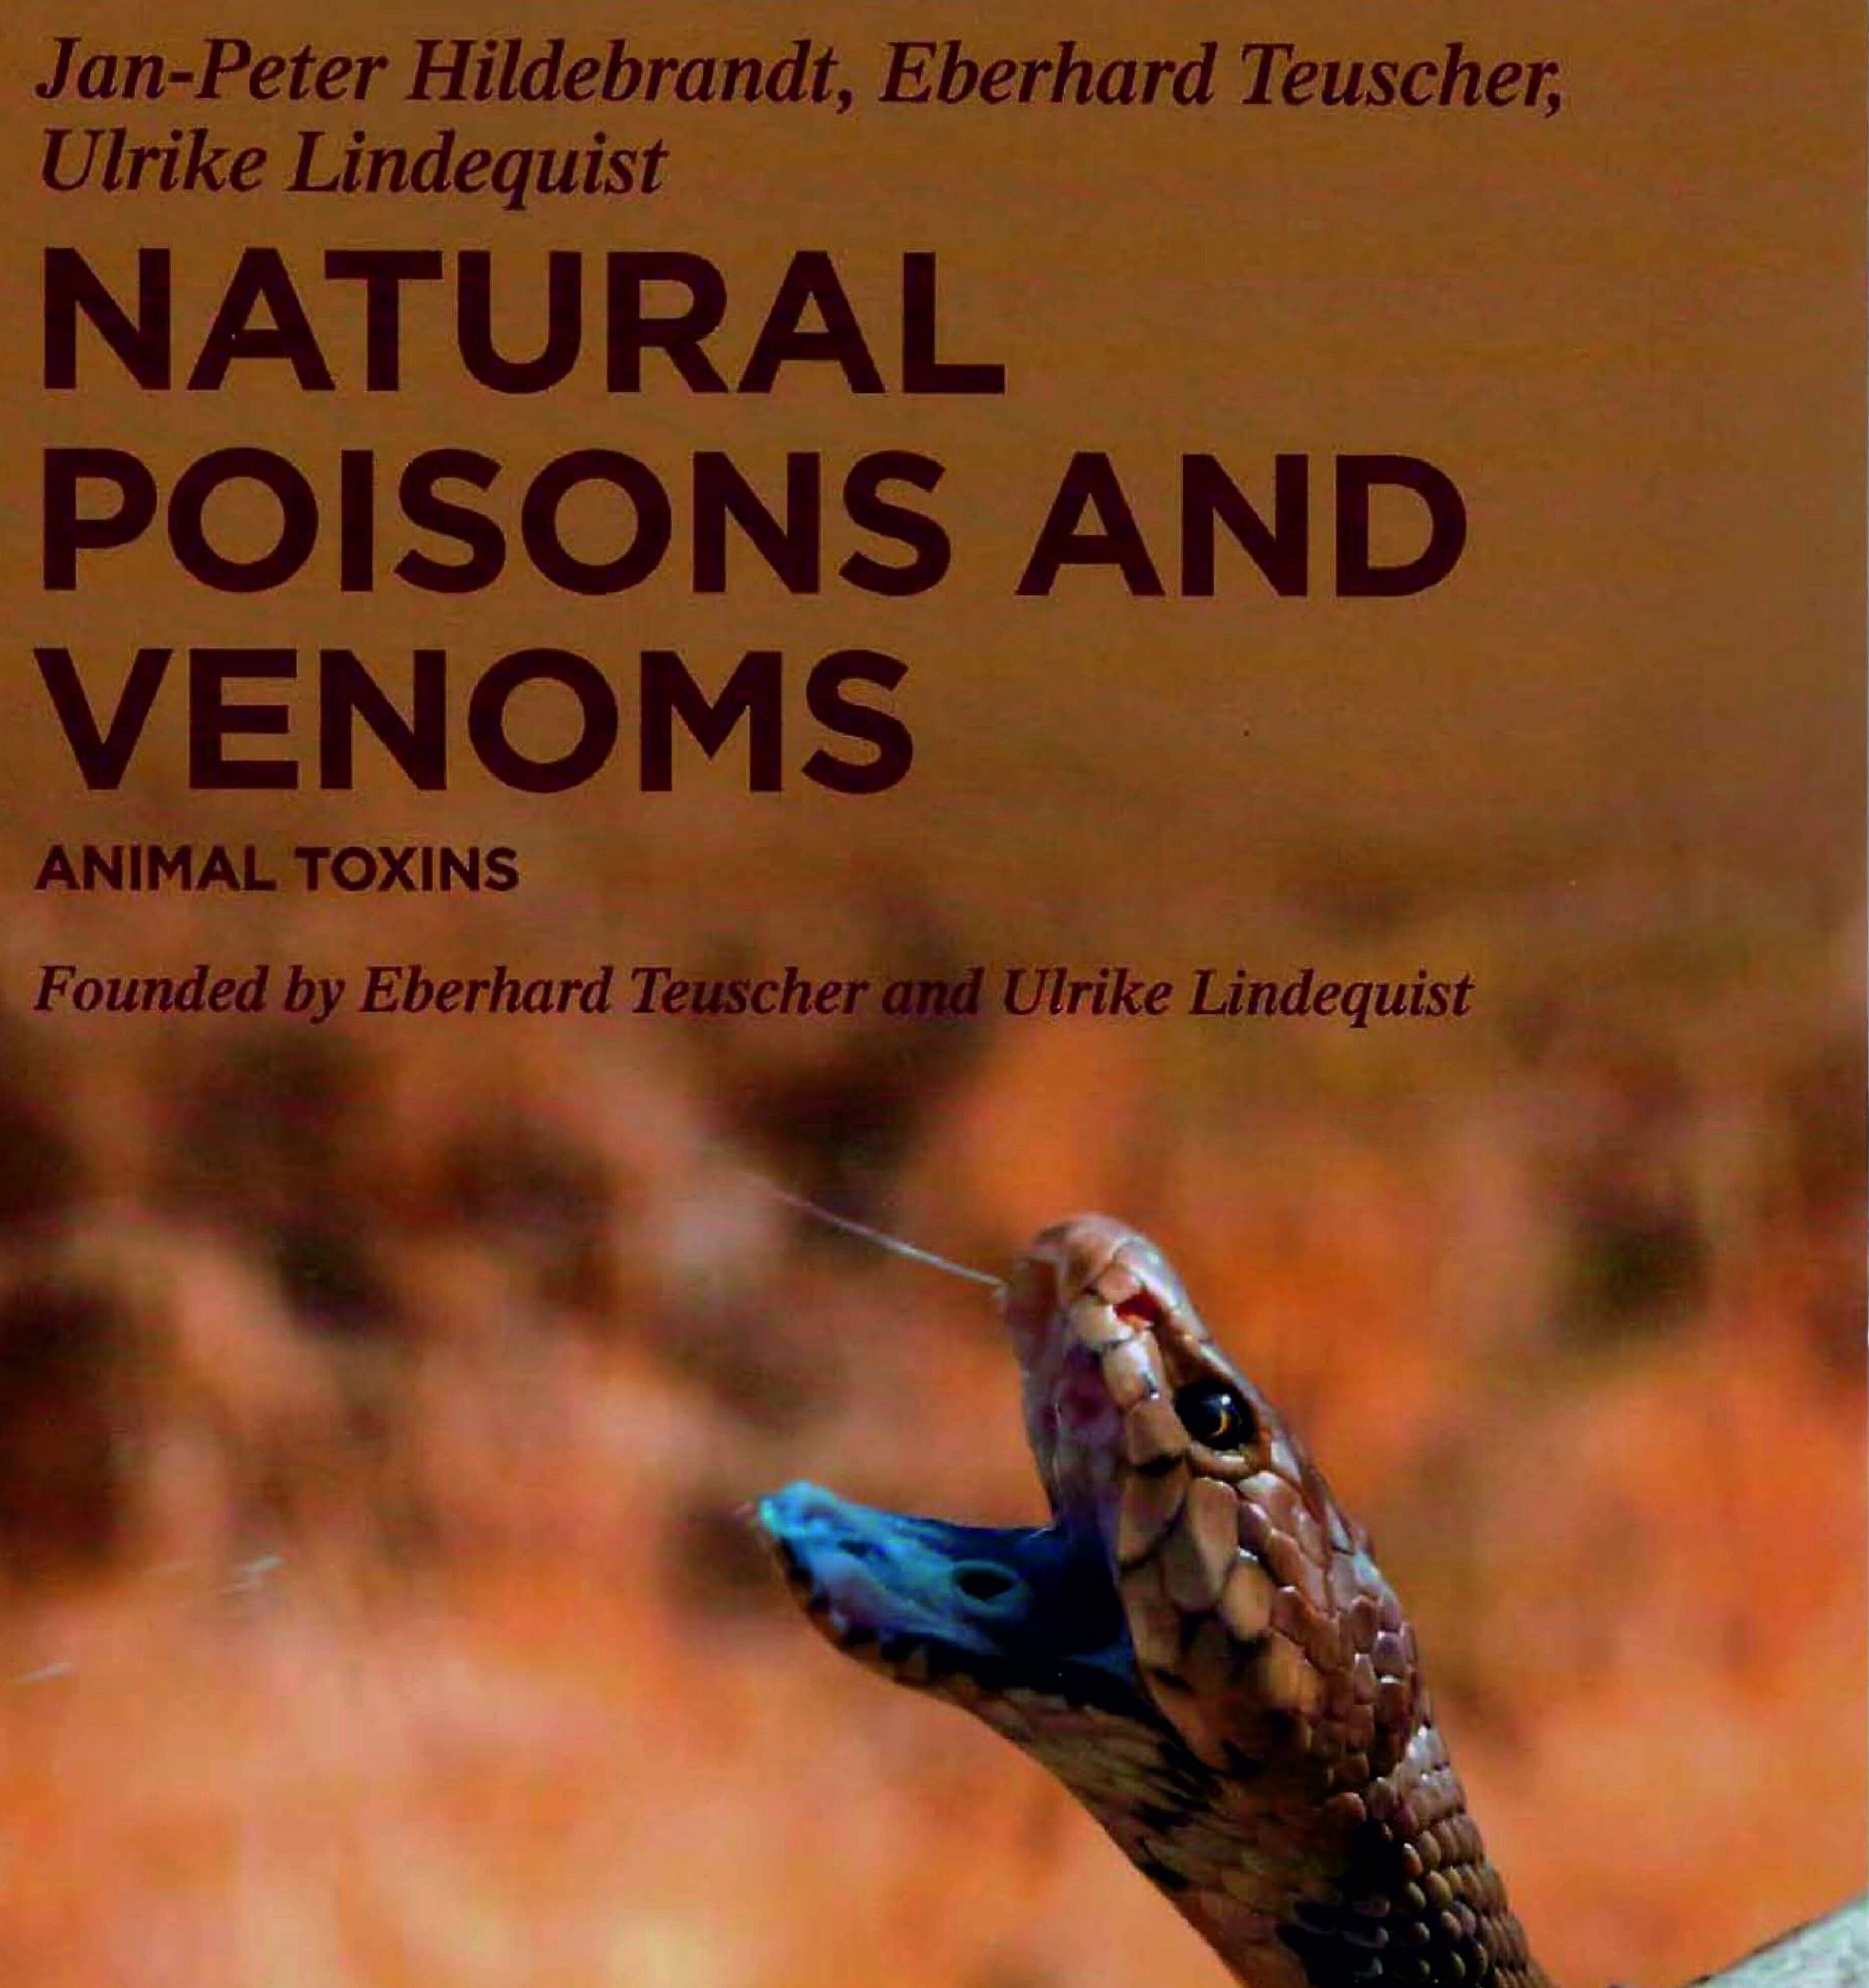 Buchcover: Natural Poisons and Venoms